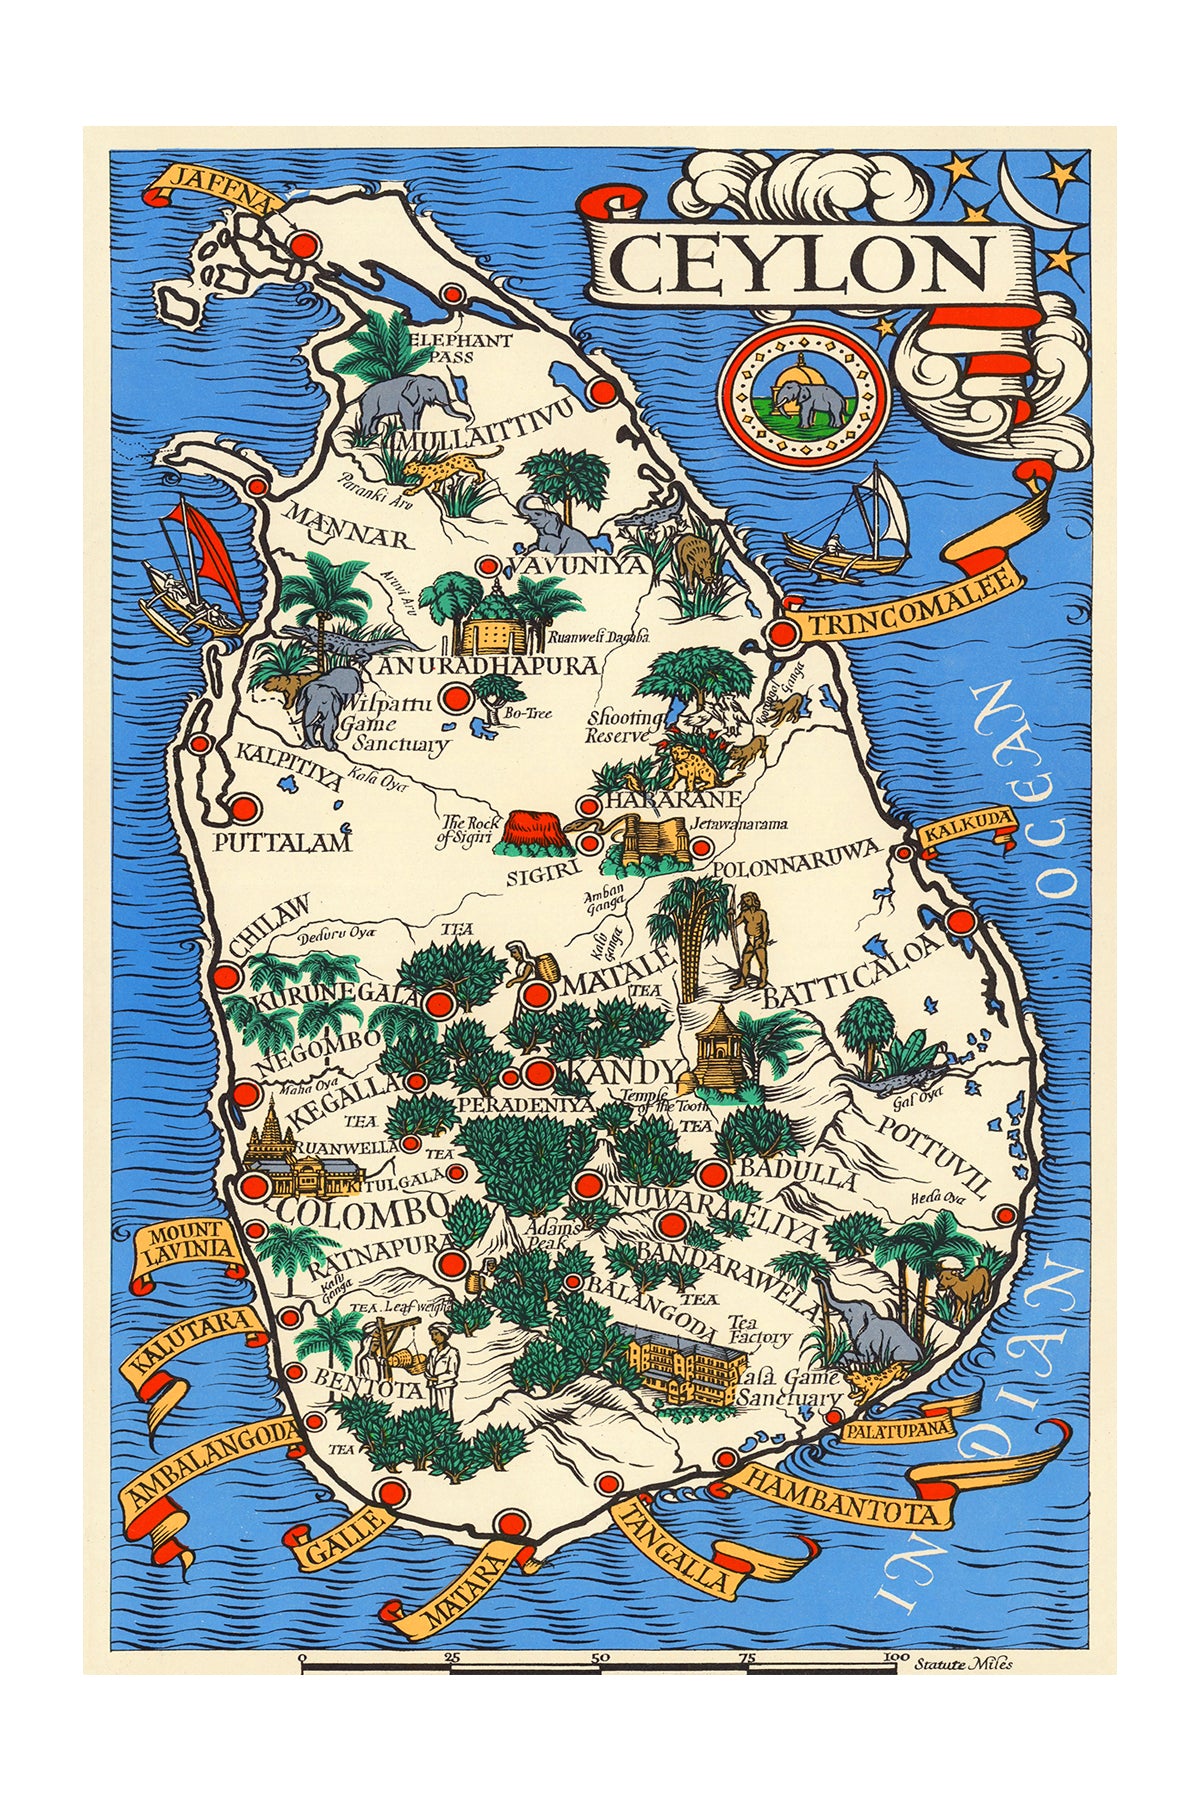 Ceylon Tea Map. [A Great Industry - Where Our Tea Comes From, 1937]